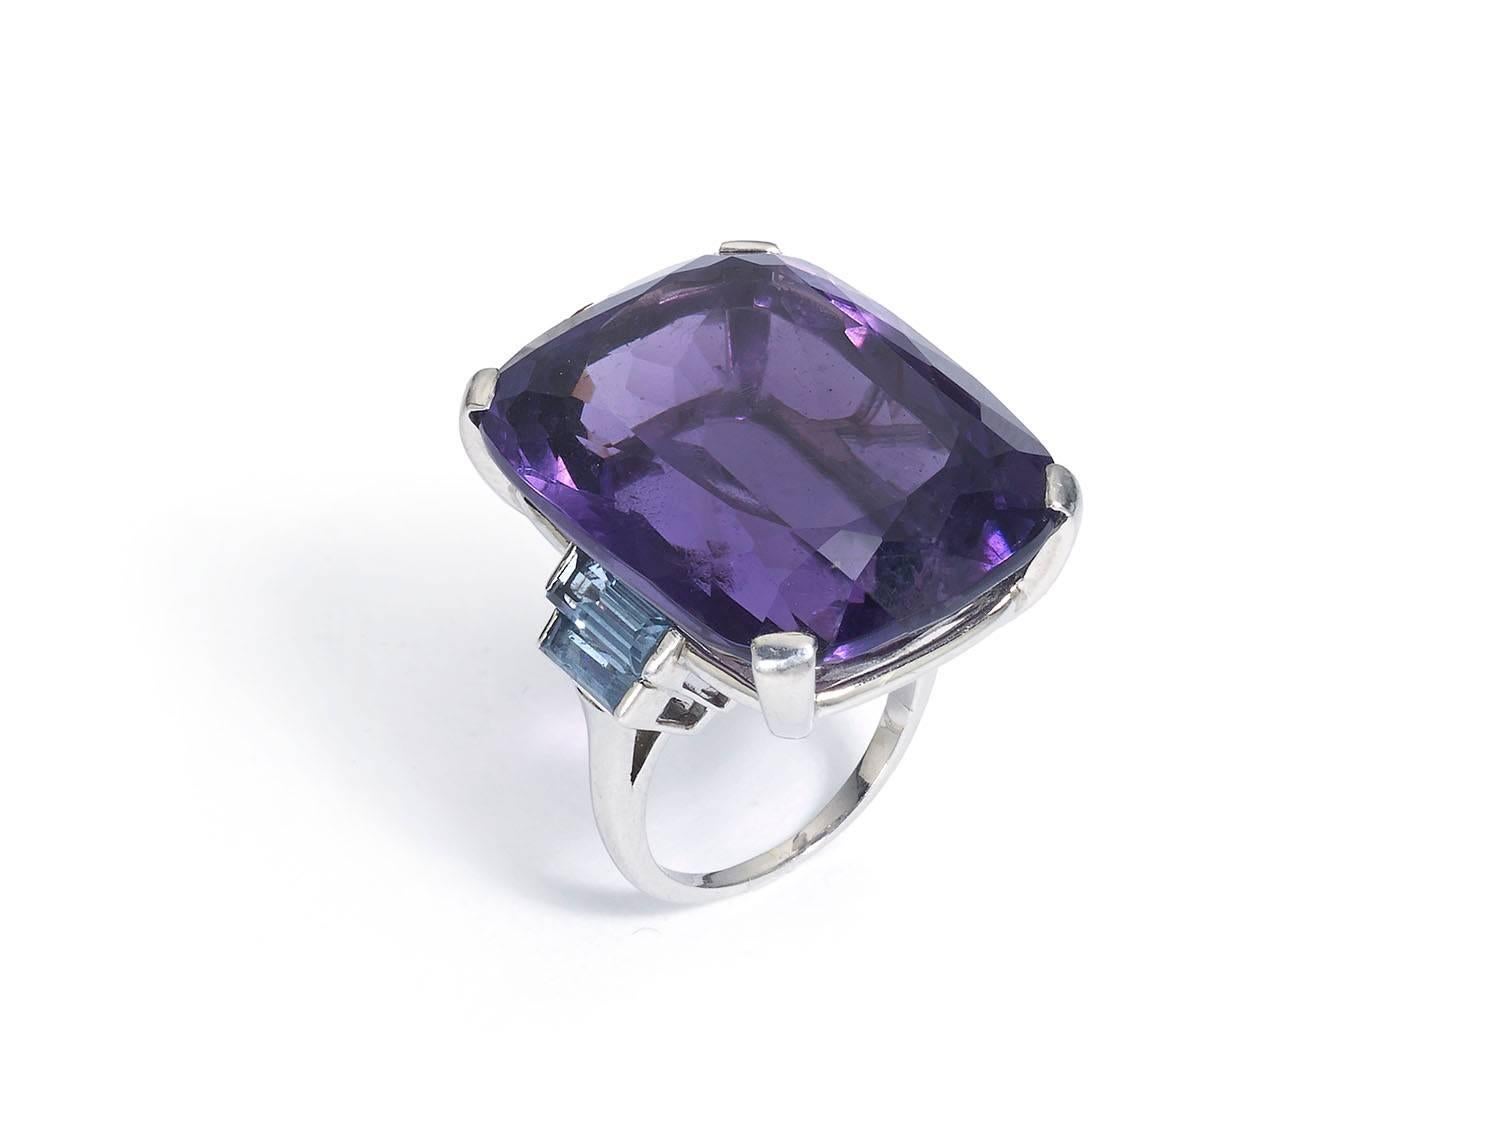 Amethyst and aquamarine cocktail ring, 18ct white gold ring, cushion cut amethyst weighing an estimated 47.00cts, with two baguette cut aquamarines set to each side, in 18ct white gold, Circa 1950's